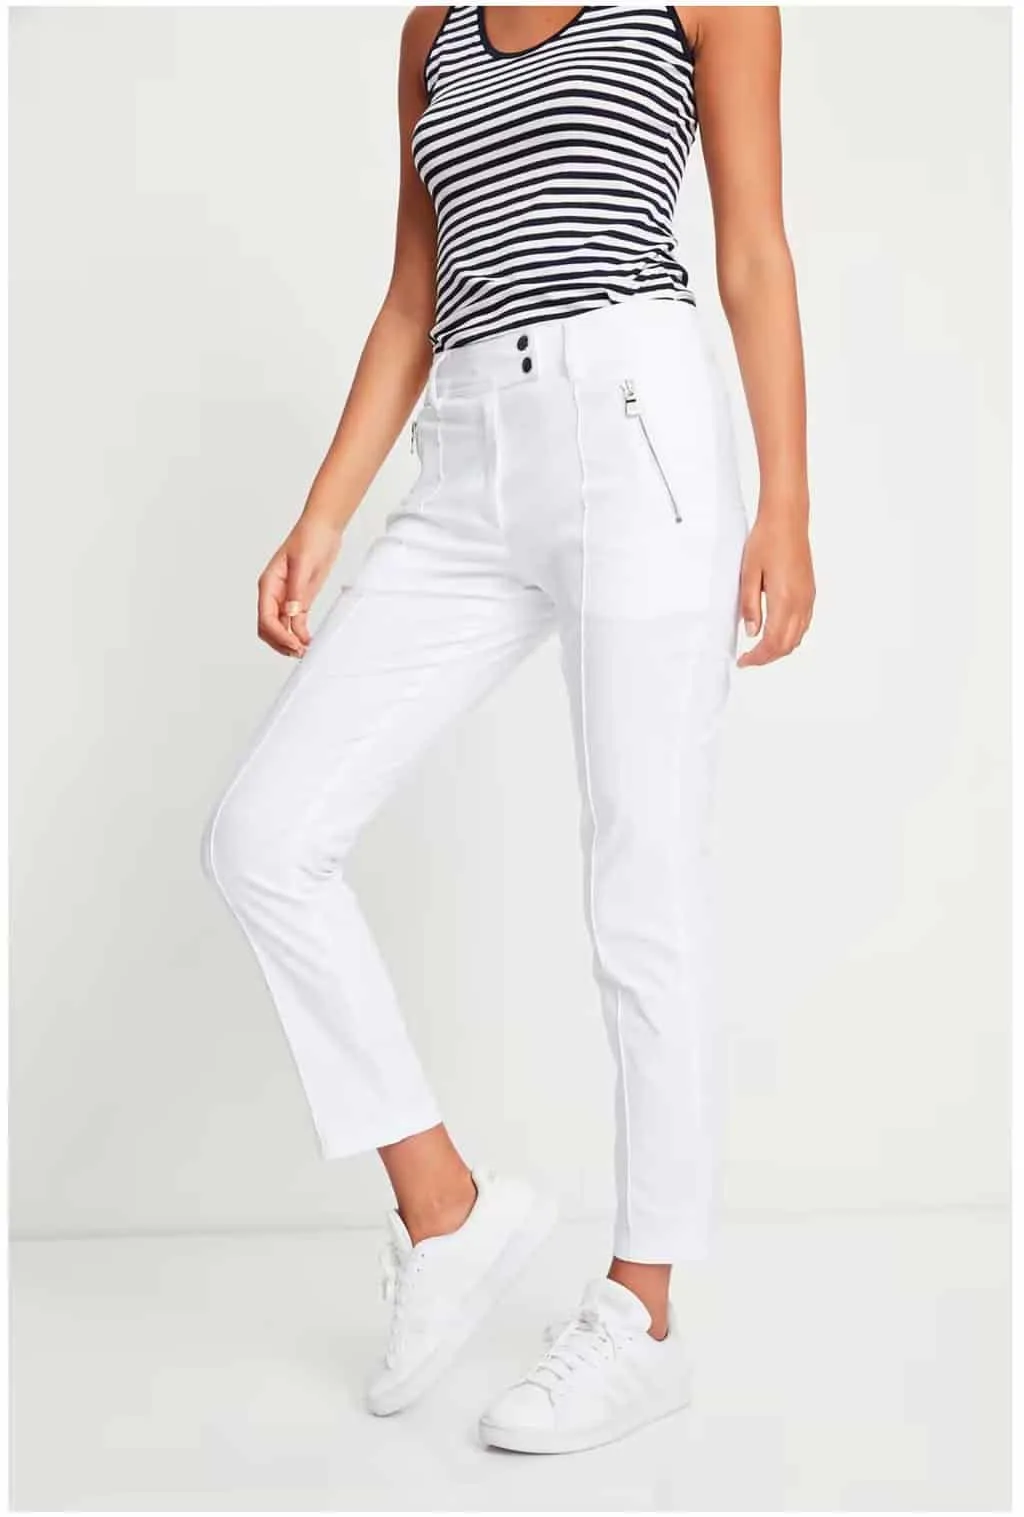 Woman modelling white Anatomi travel pants with a striped top.